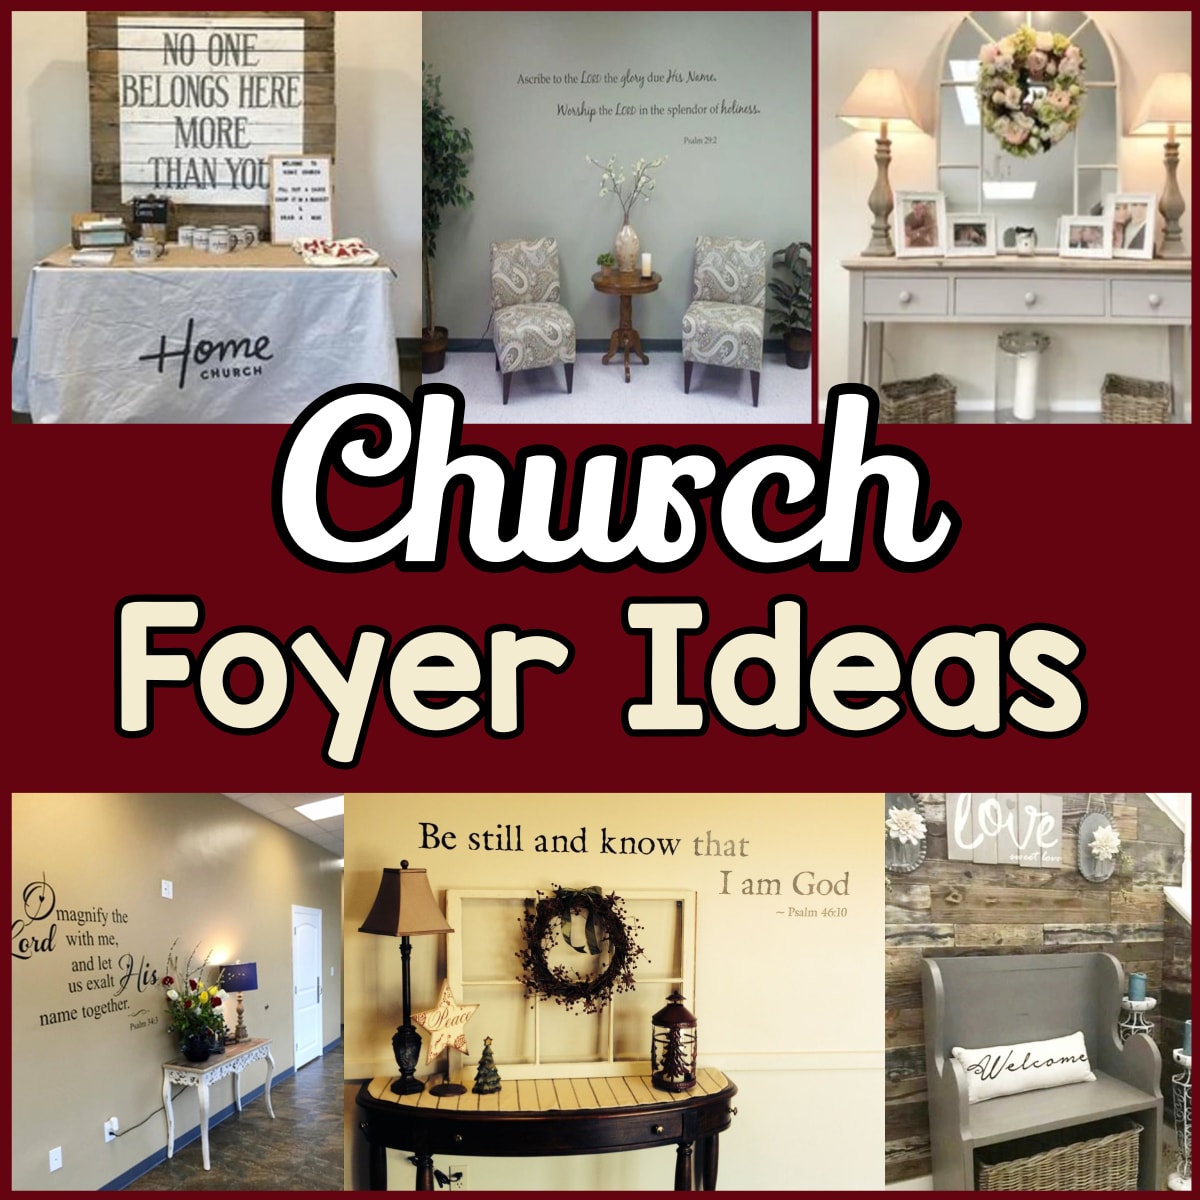 Church foyer ideas for decorating a small church foyer - signage and furniture ideas too